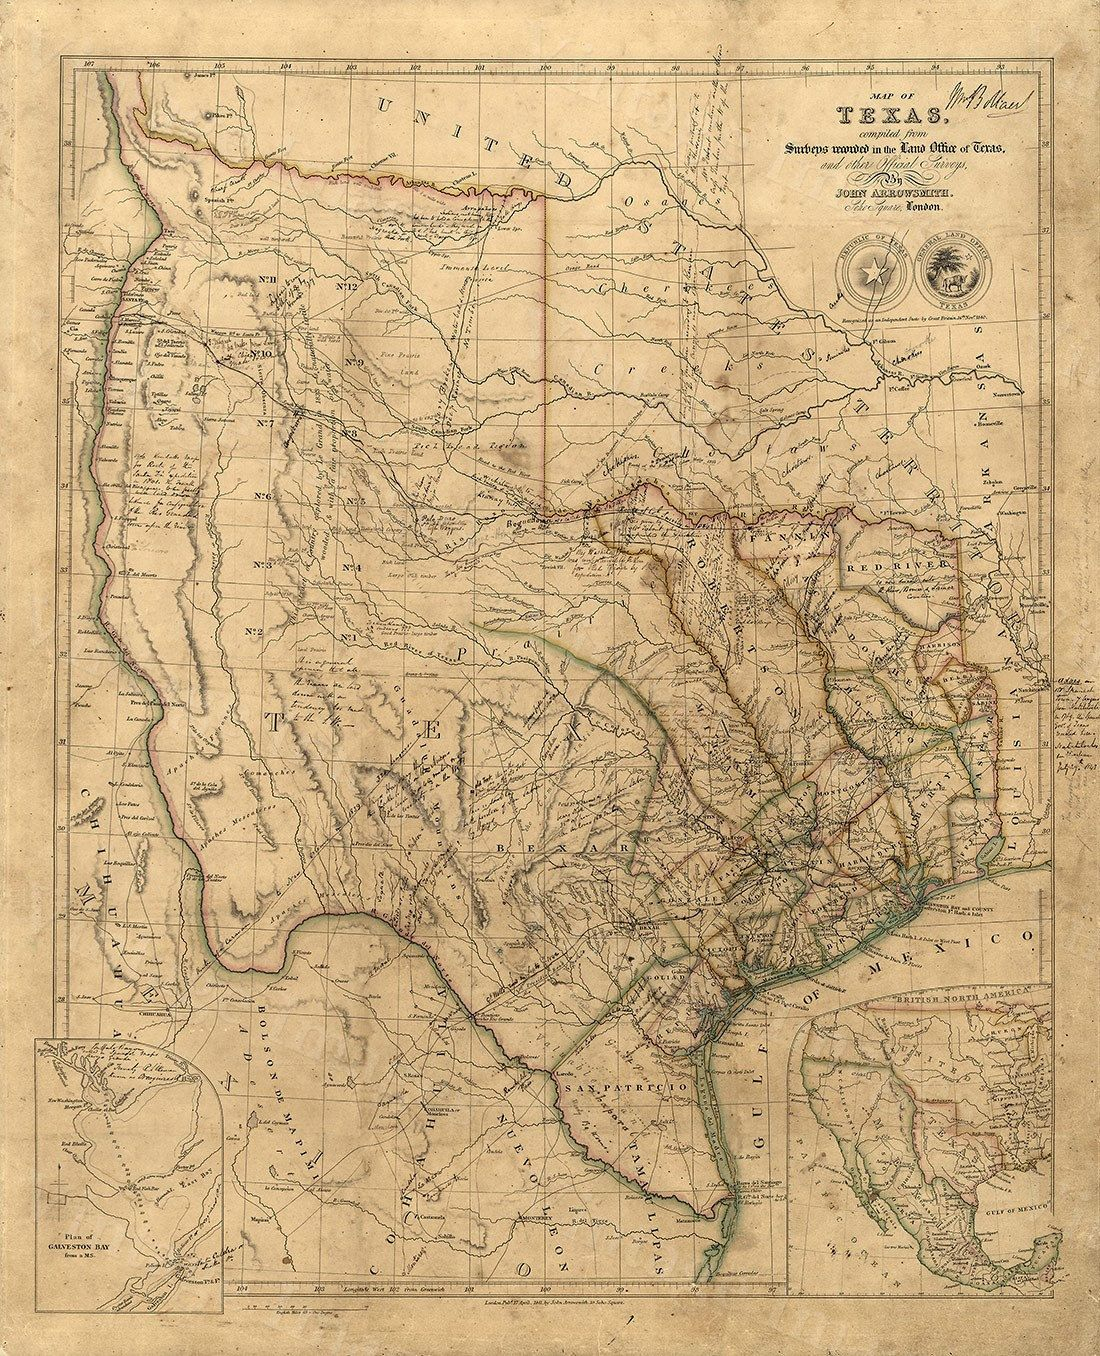 Old Texas Wall Map 1841 Historical Texas Map Antique Decorator Style - Antique Texas Maps For Sale